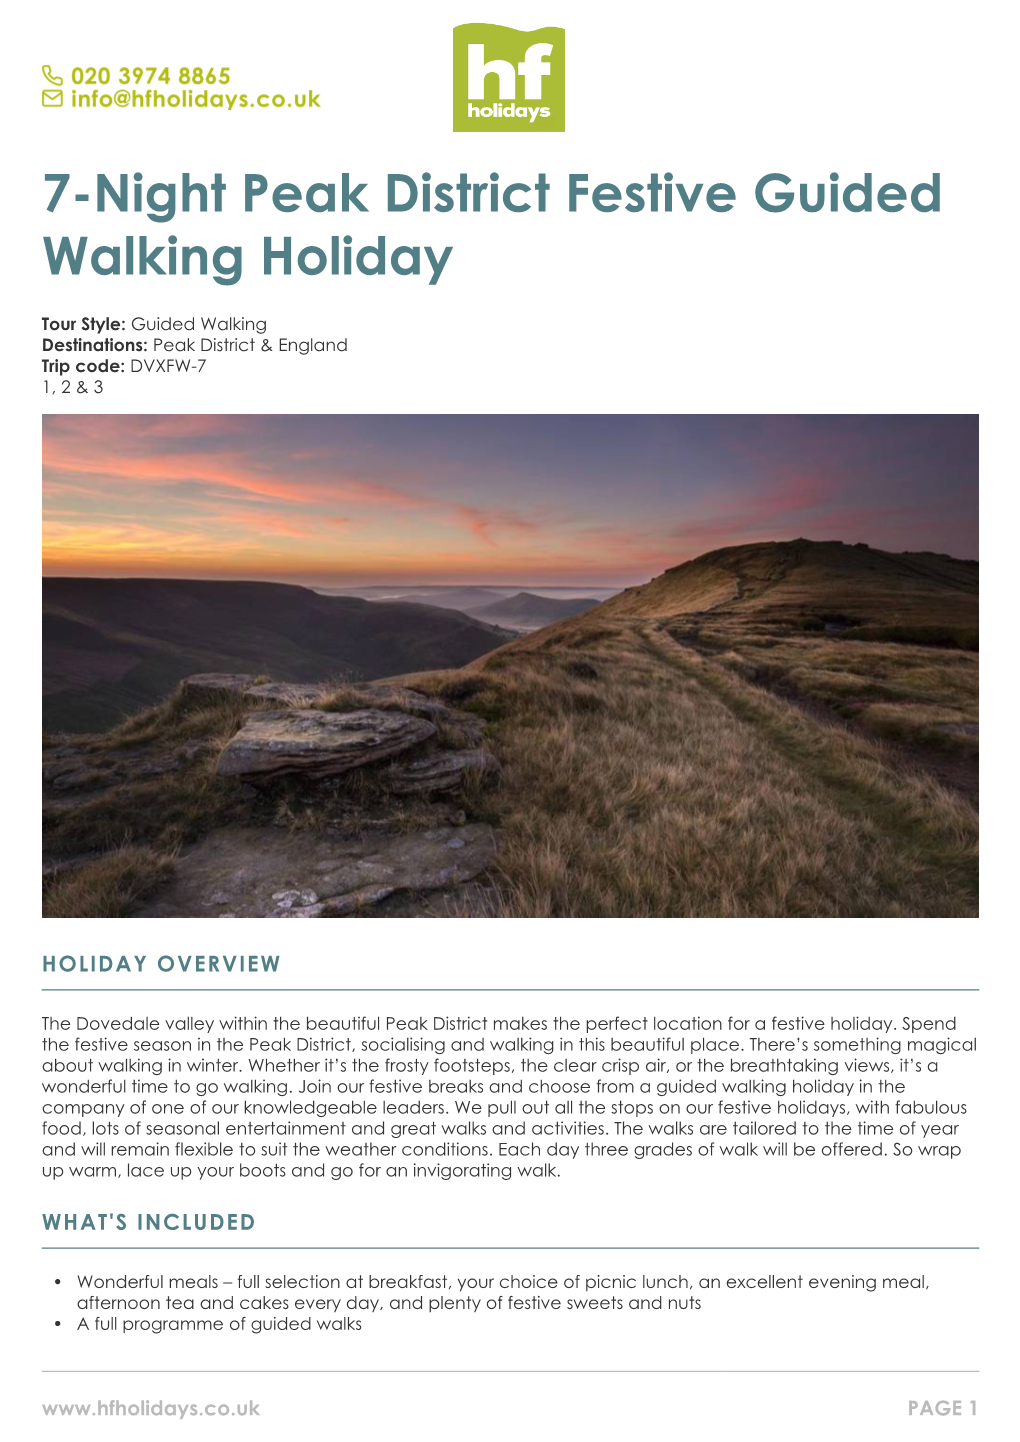 7-Night Peak District Festive Guided Walking Holiday